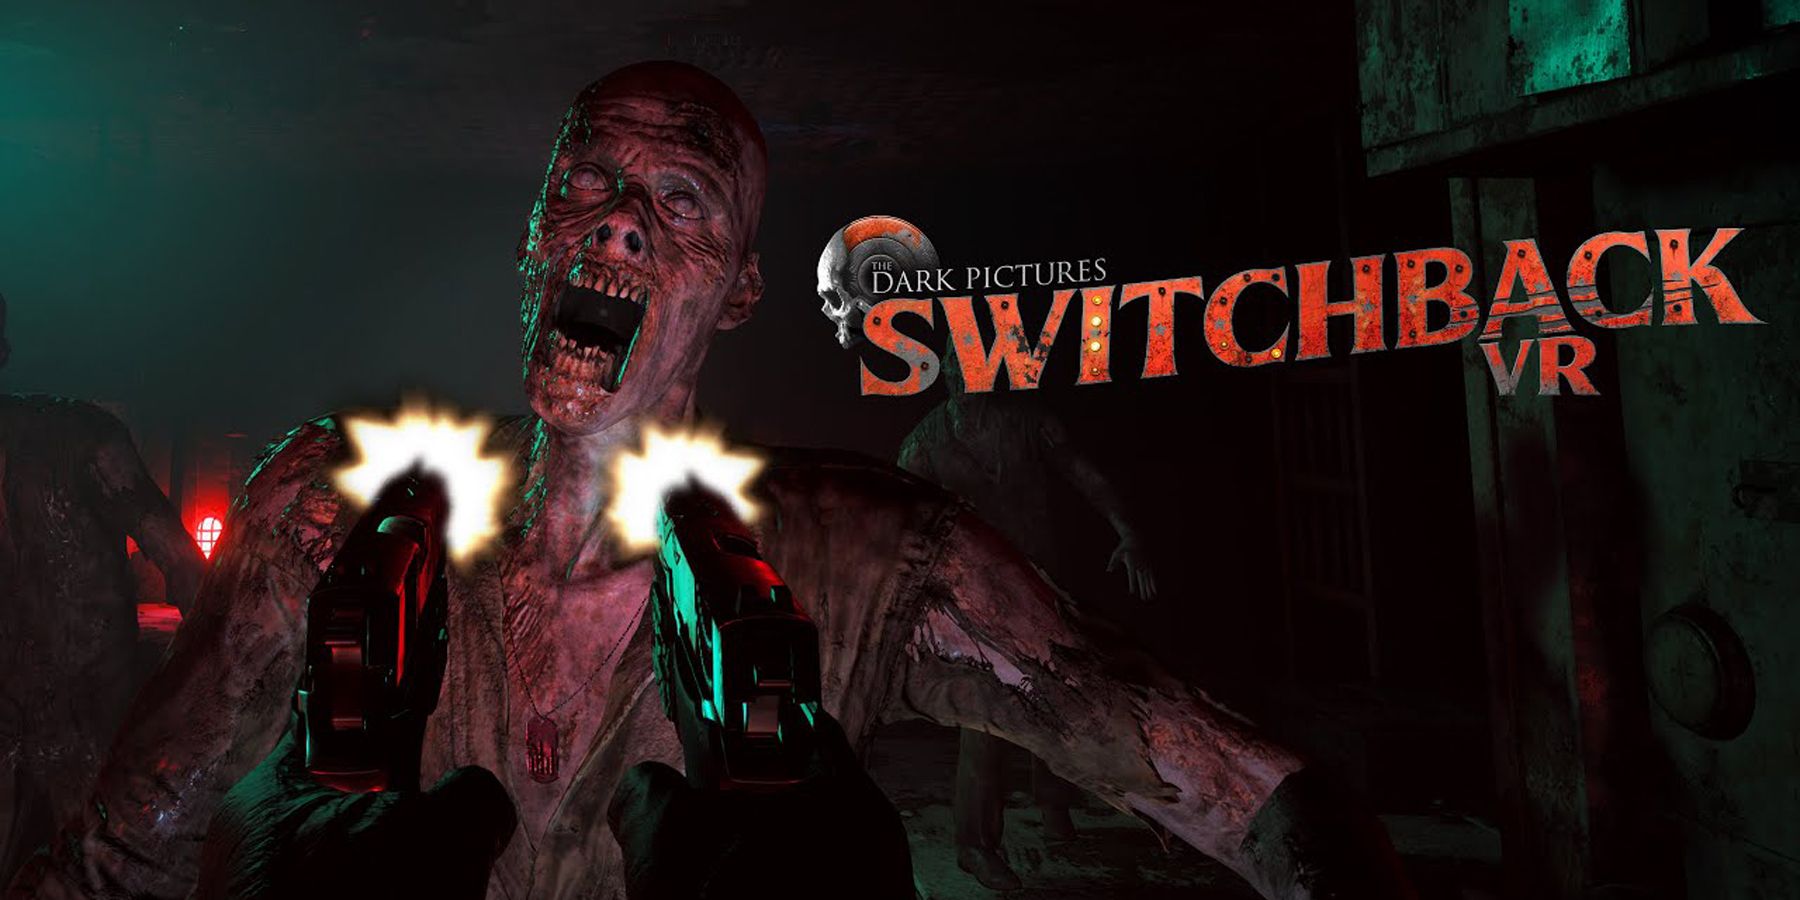 The Dark Pictures: Switchback VR reveals pre-order